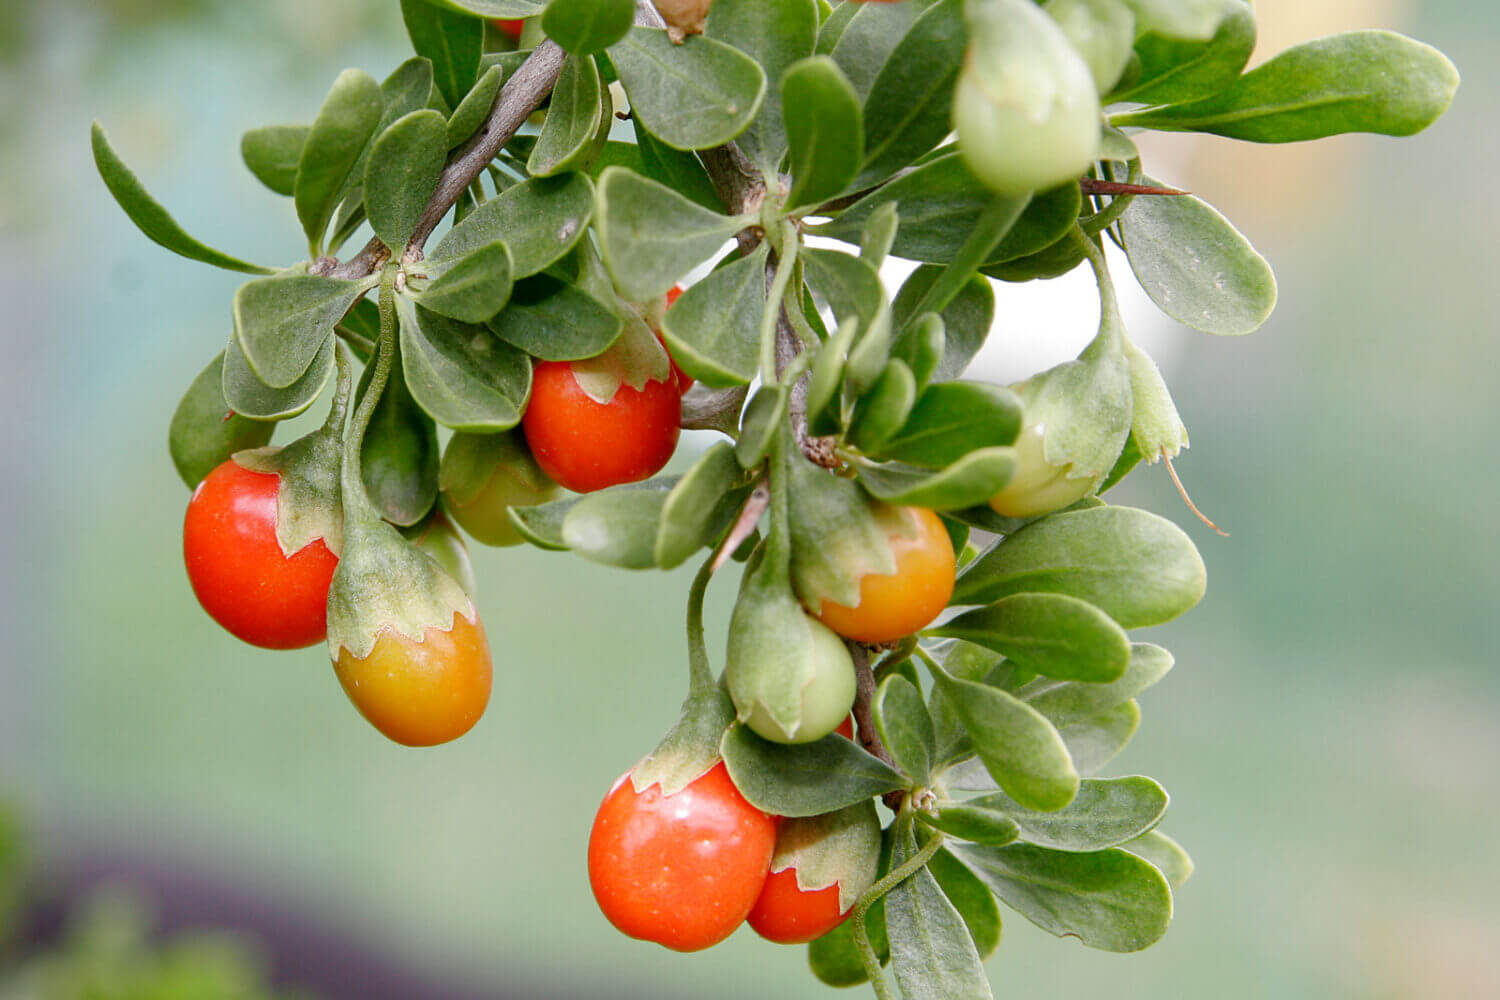 The fruit of the African Boxthorn. Image Credit: Wikimedia Commons (www.commons.wikimedia.org/).